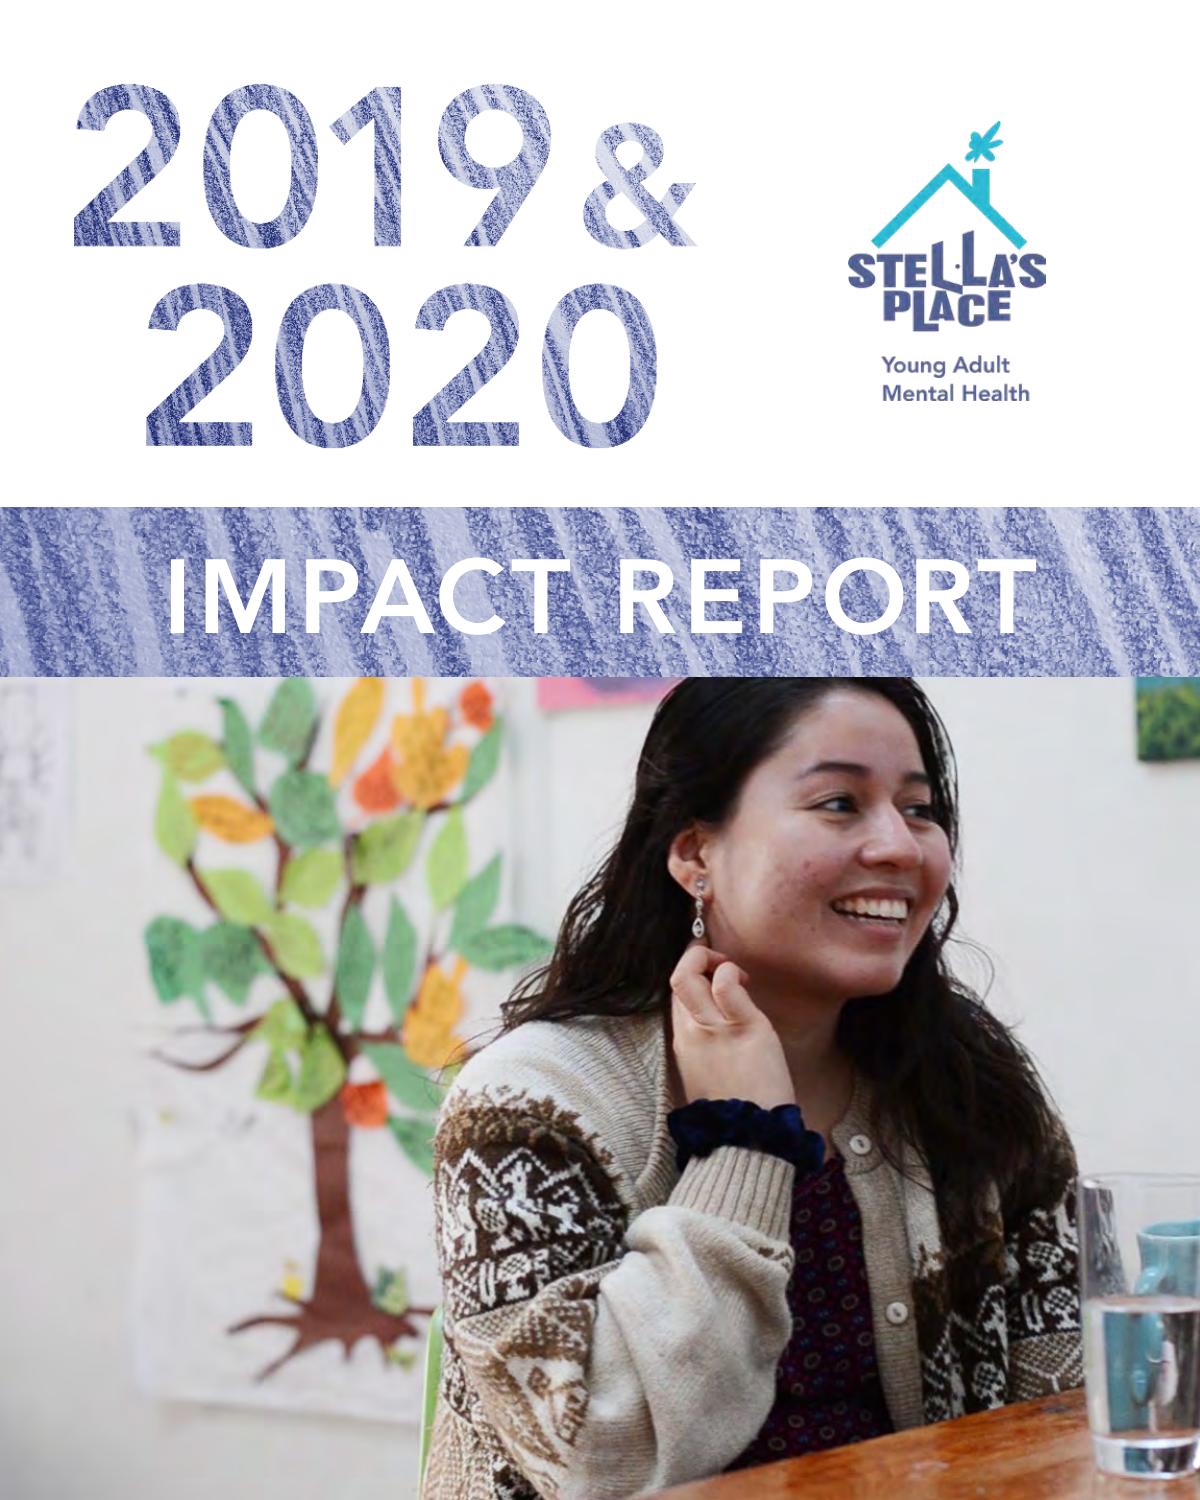 STELLASPLACE 2021 Annual Report